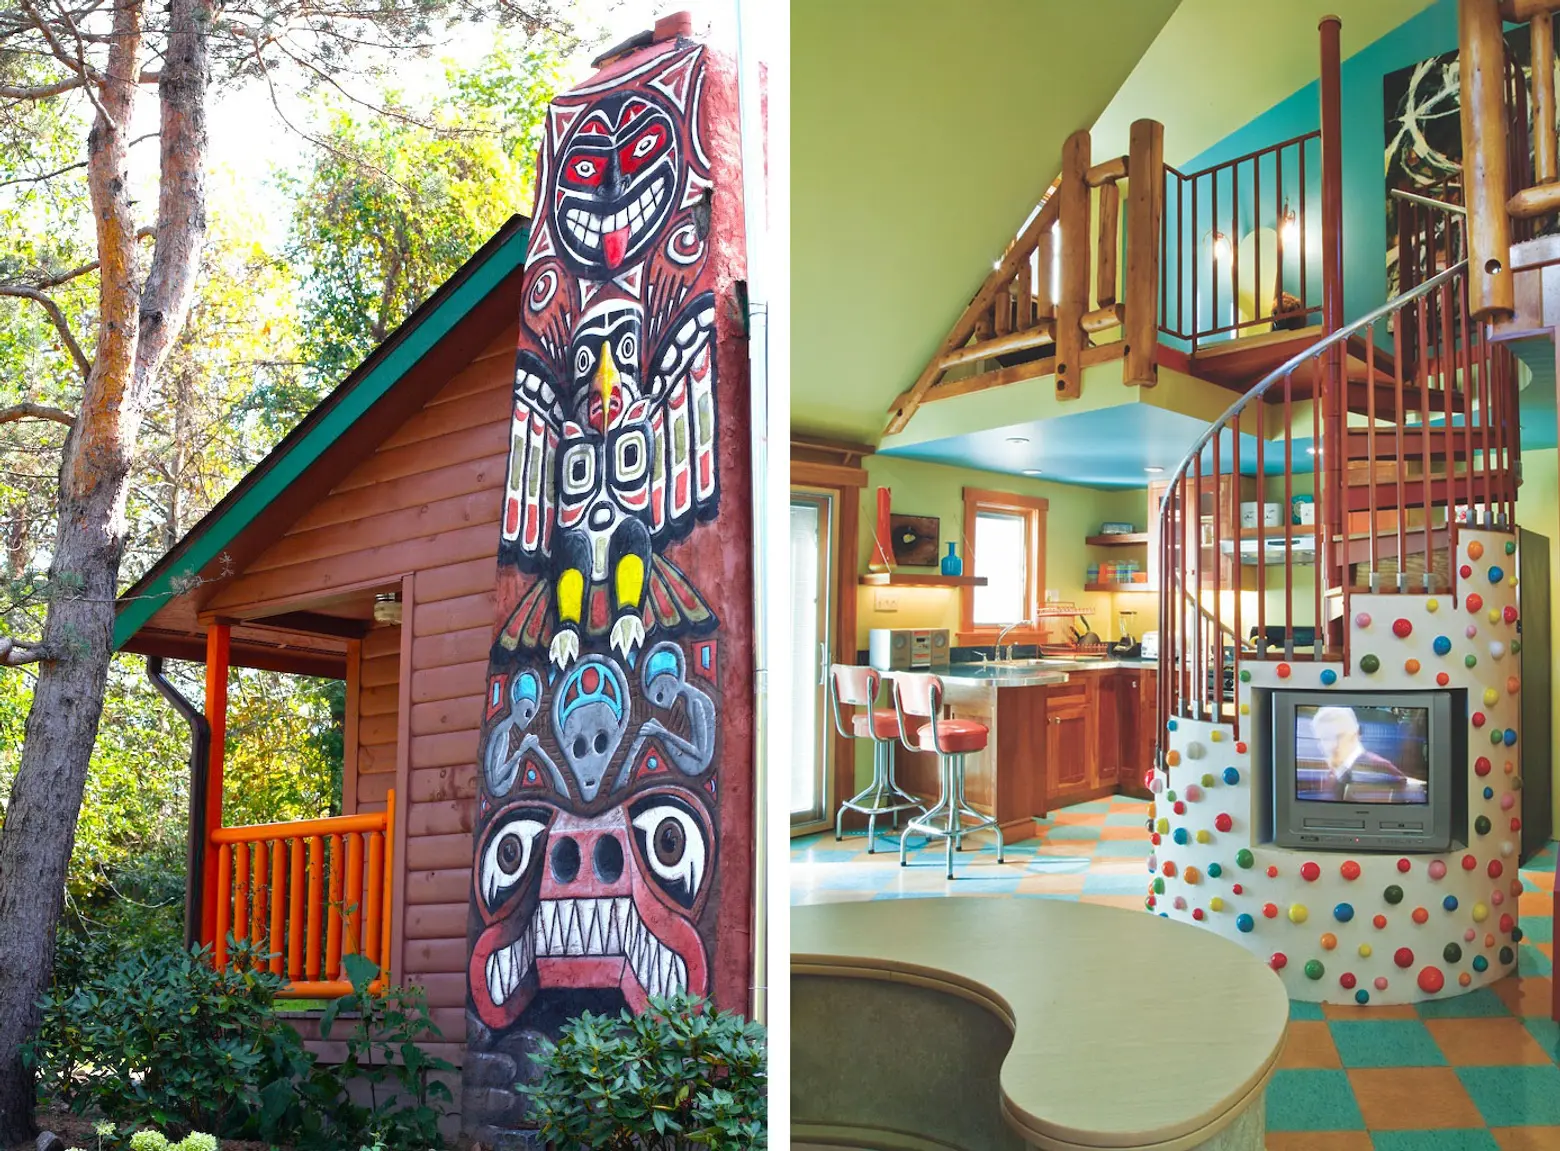 Escape the everyday in a retro Catskills cabin by Kate Pierson of the B-52s